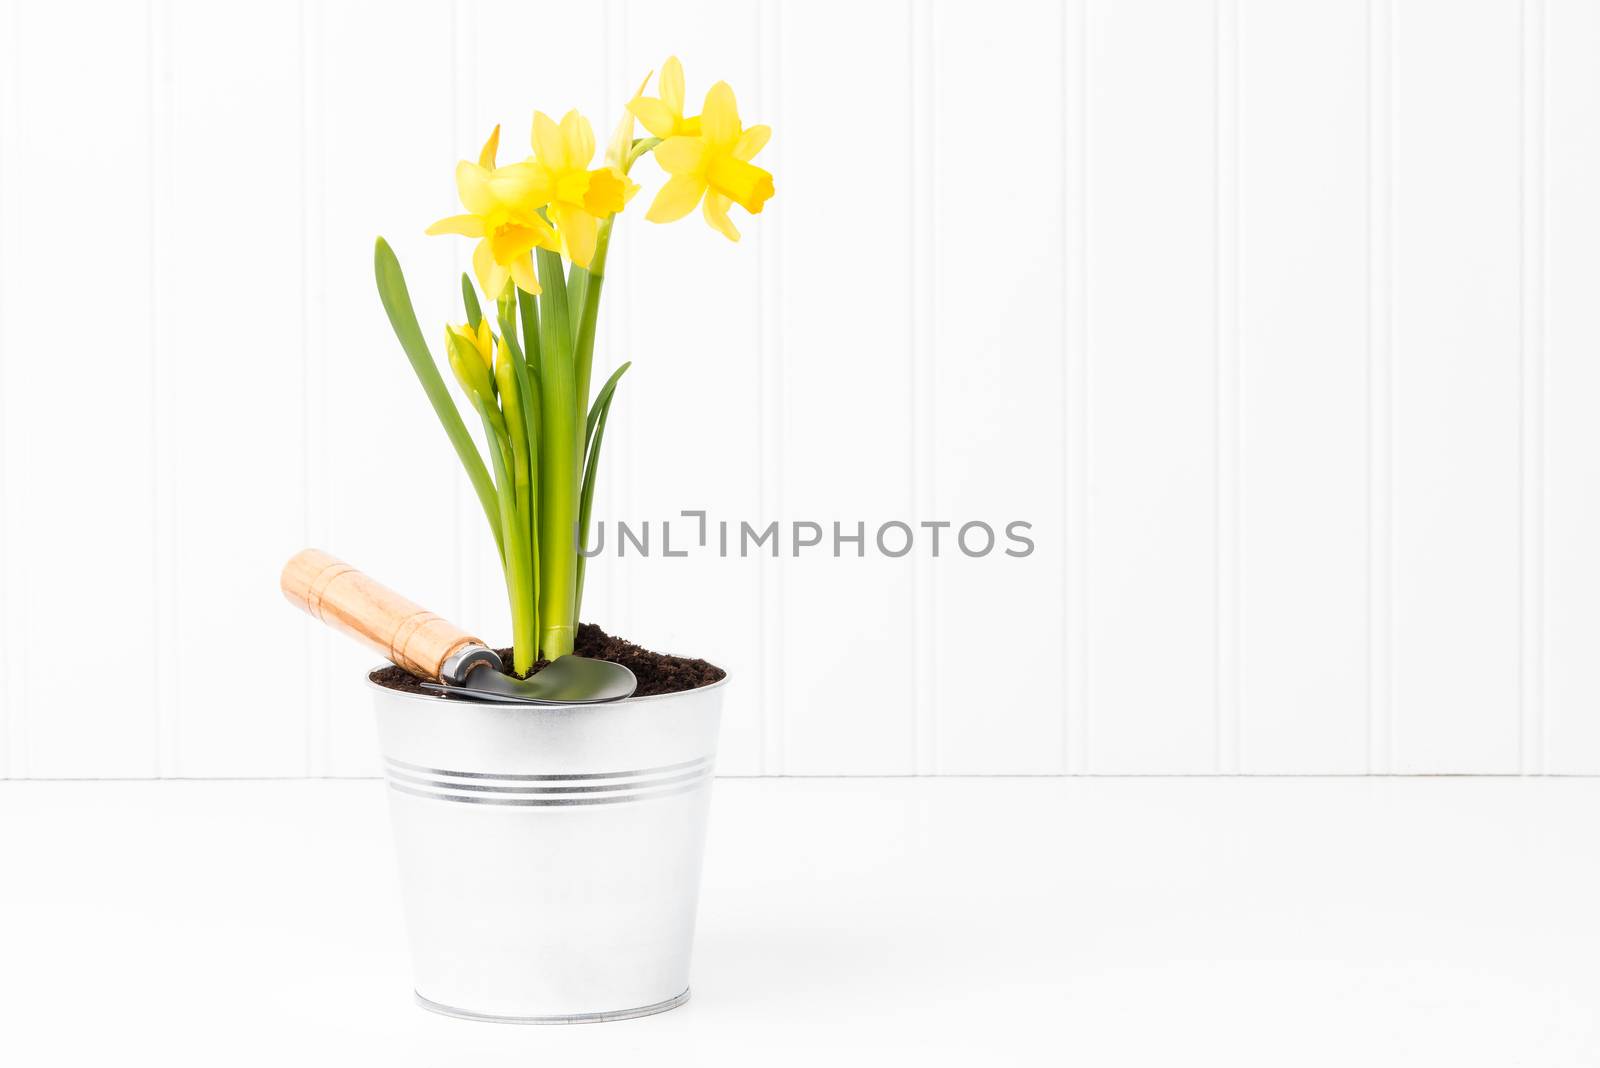 Clump of beautiful spring daffodils in a silver metal pot.